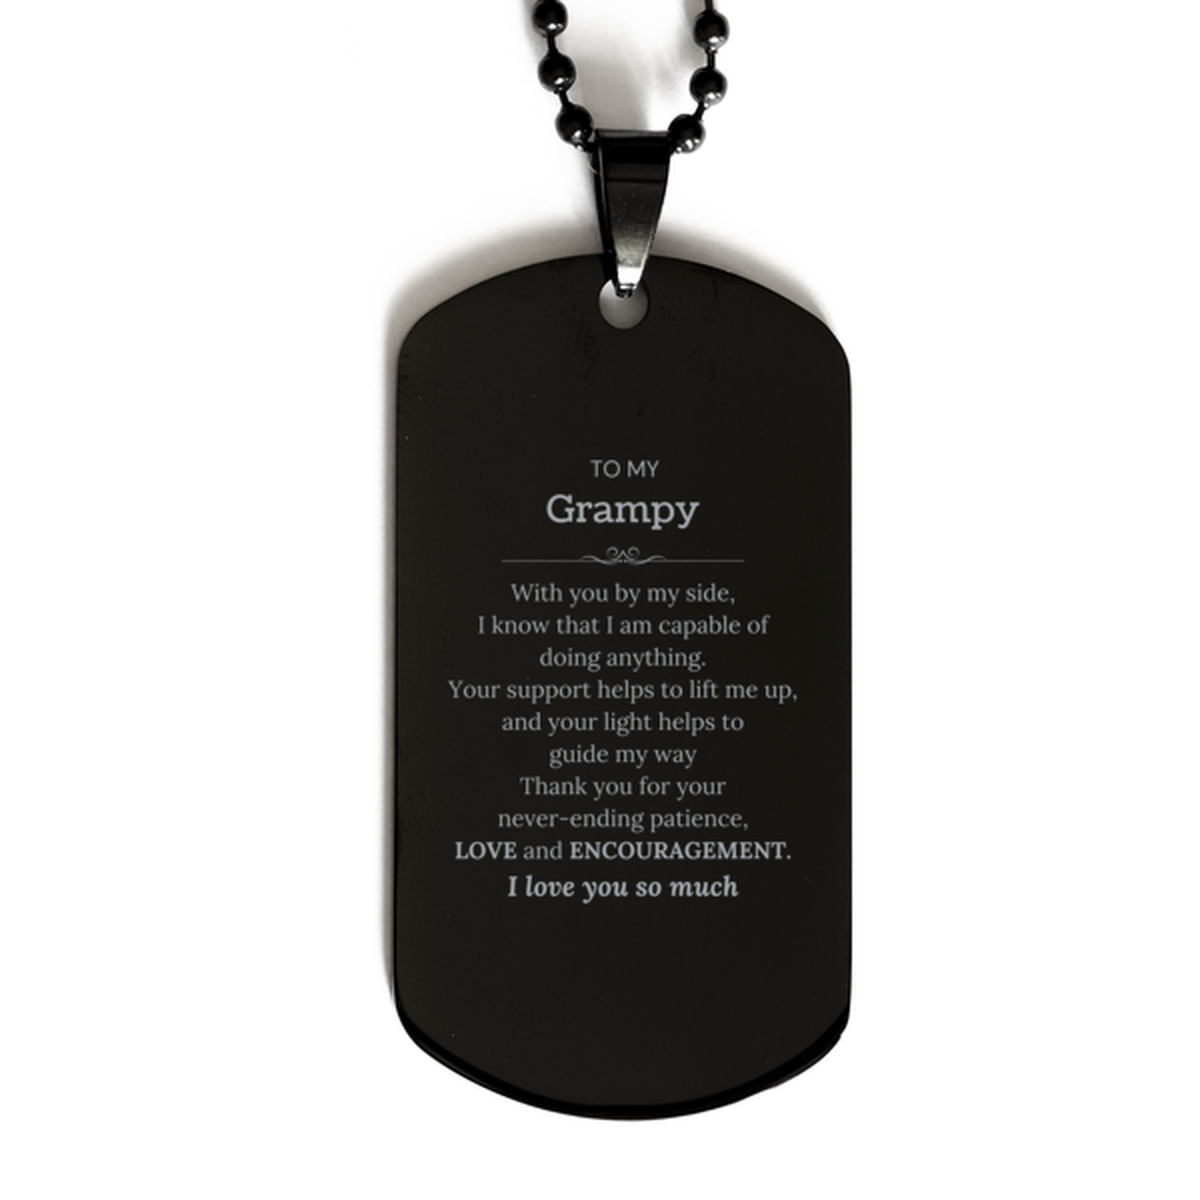 Appreciation Grampy Black Dog Tag Gifts, To My Grampy Birthday Christmas Wedding Keepsake Gifts for Grampy With you by my side, I know that I am capable of doing anything. I love you so much